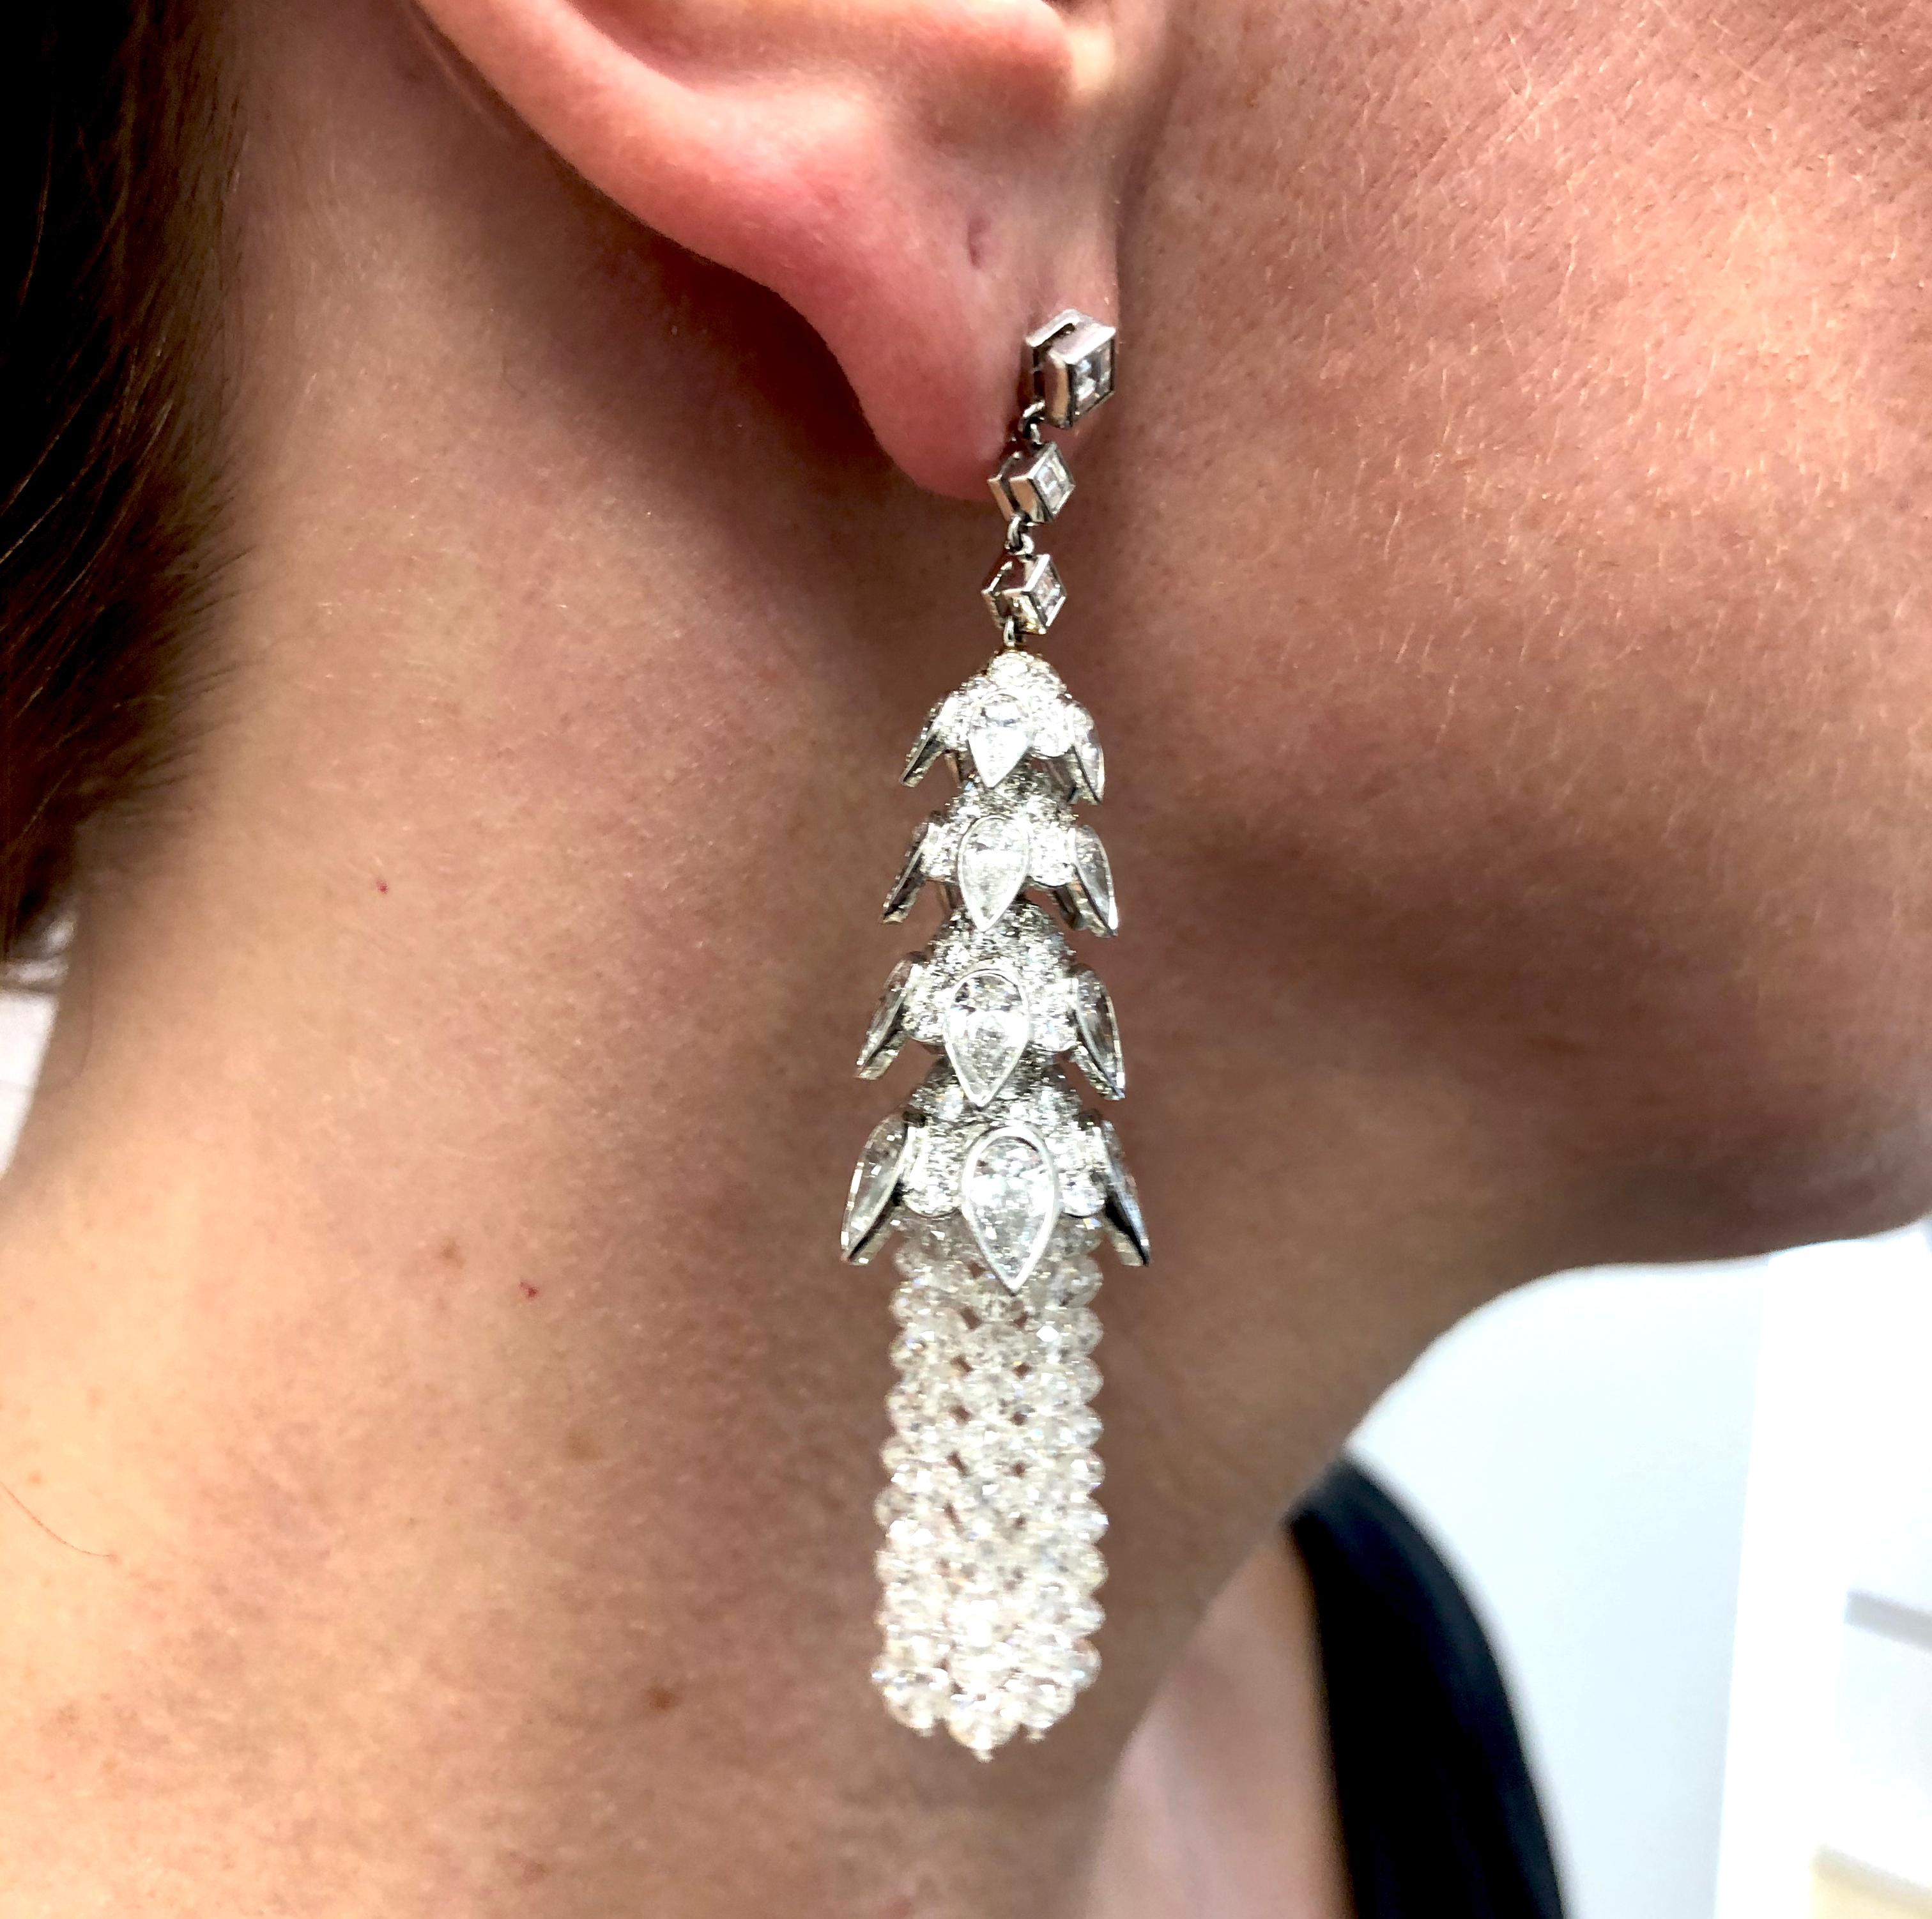 Contemporary Diamond Tassel Earrings in Platinum.

A contemporary pair of earrings with four tiers of graduated platinum crowns and a cascading fringe of scintillating diamond beads. Each crown is set with white pear-shaped and round brilliant